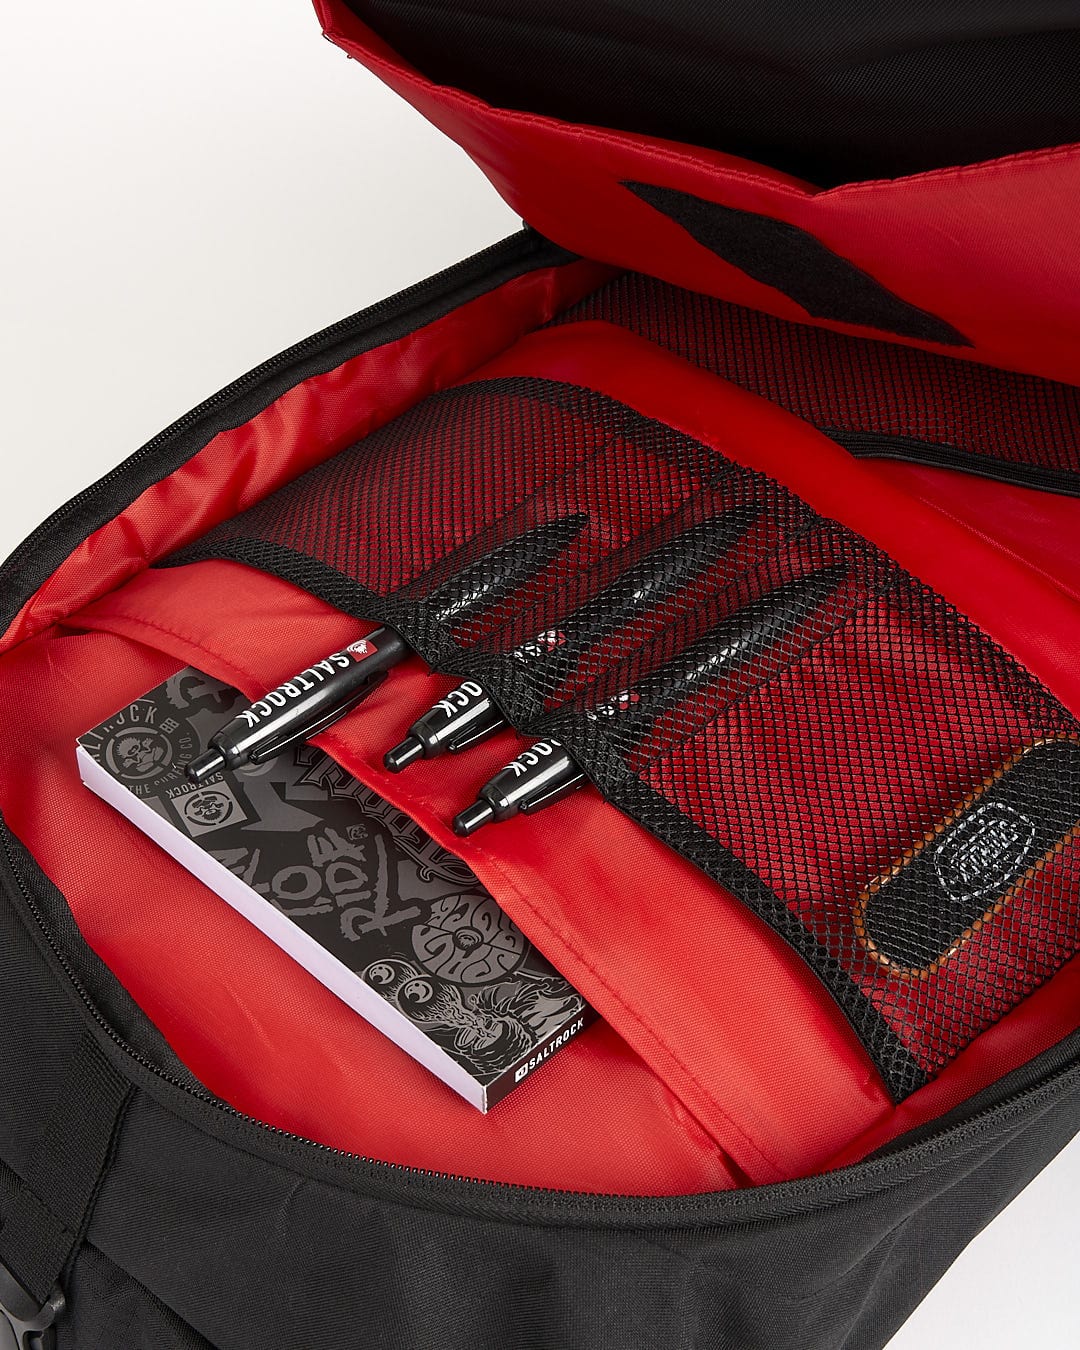 A red and black Streamline backpack from Saltrock with pens and pencils inside.